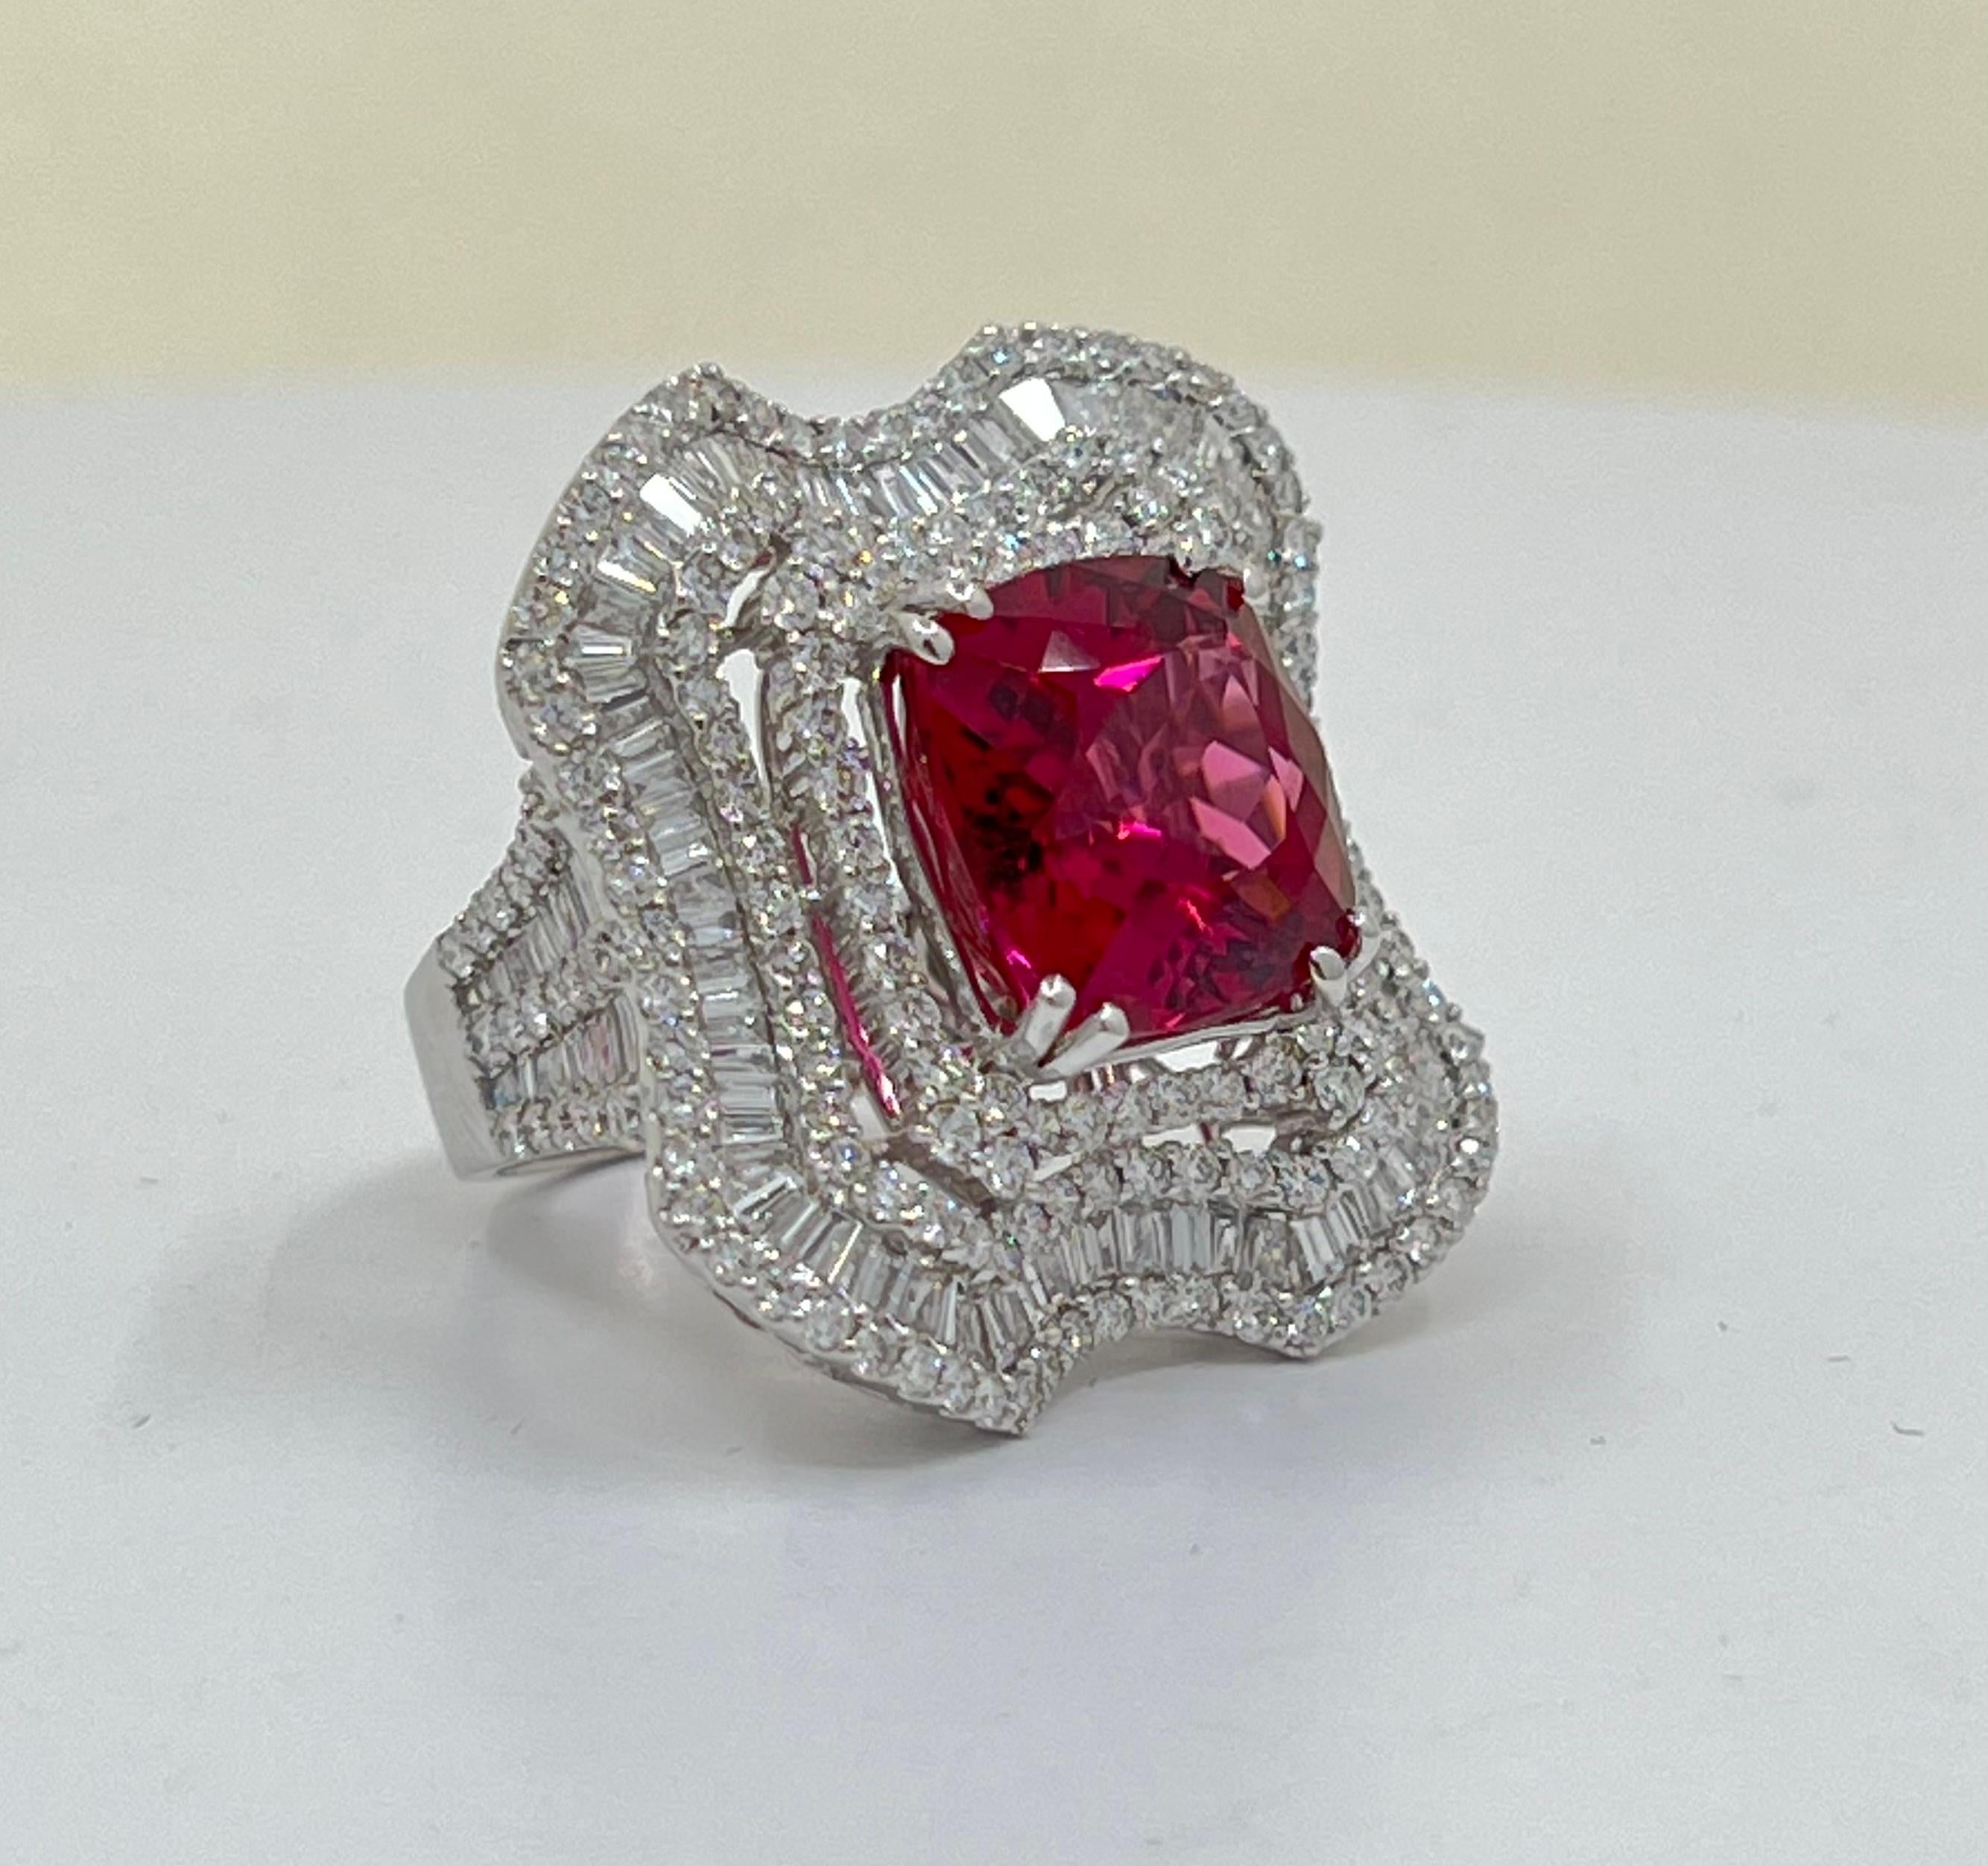 Absolutely exquisite, large cushion cut vivid pink rubellite or rubelite, is talon prong set in 18 karat white gold and surrounded by prong-set baguette and round brilliant diamonds in a timeless and very elegant cocktail ring setting. The center